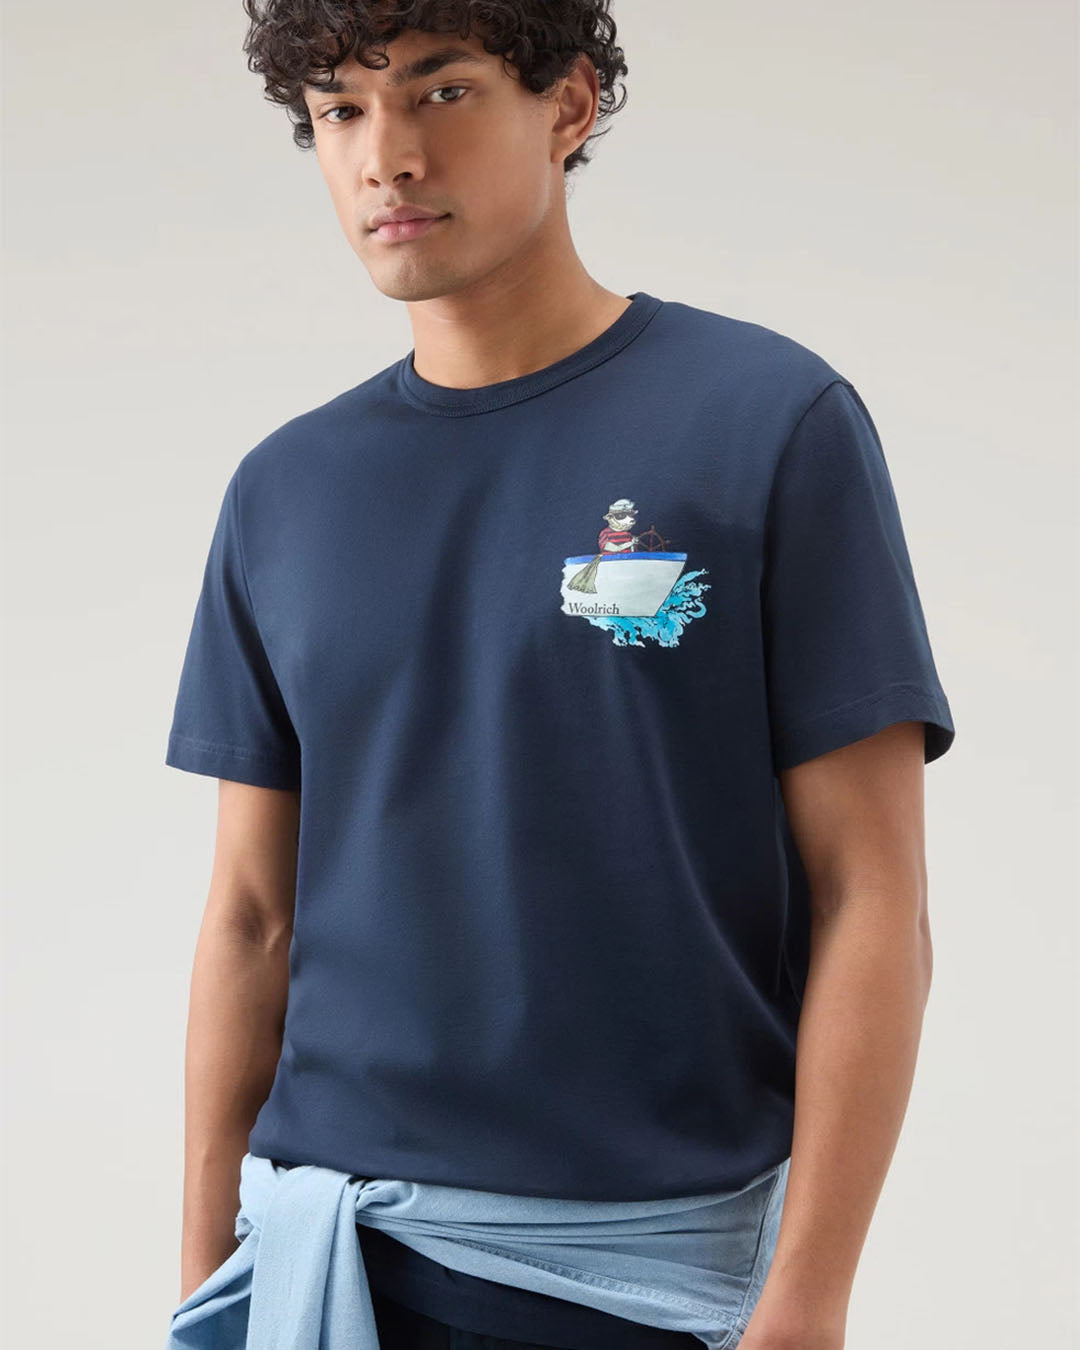 Woolrich Animated Sheep T-Shirt